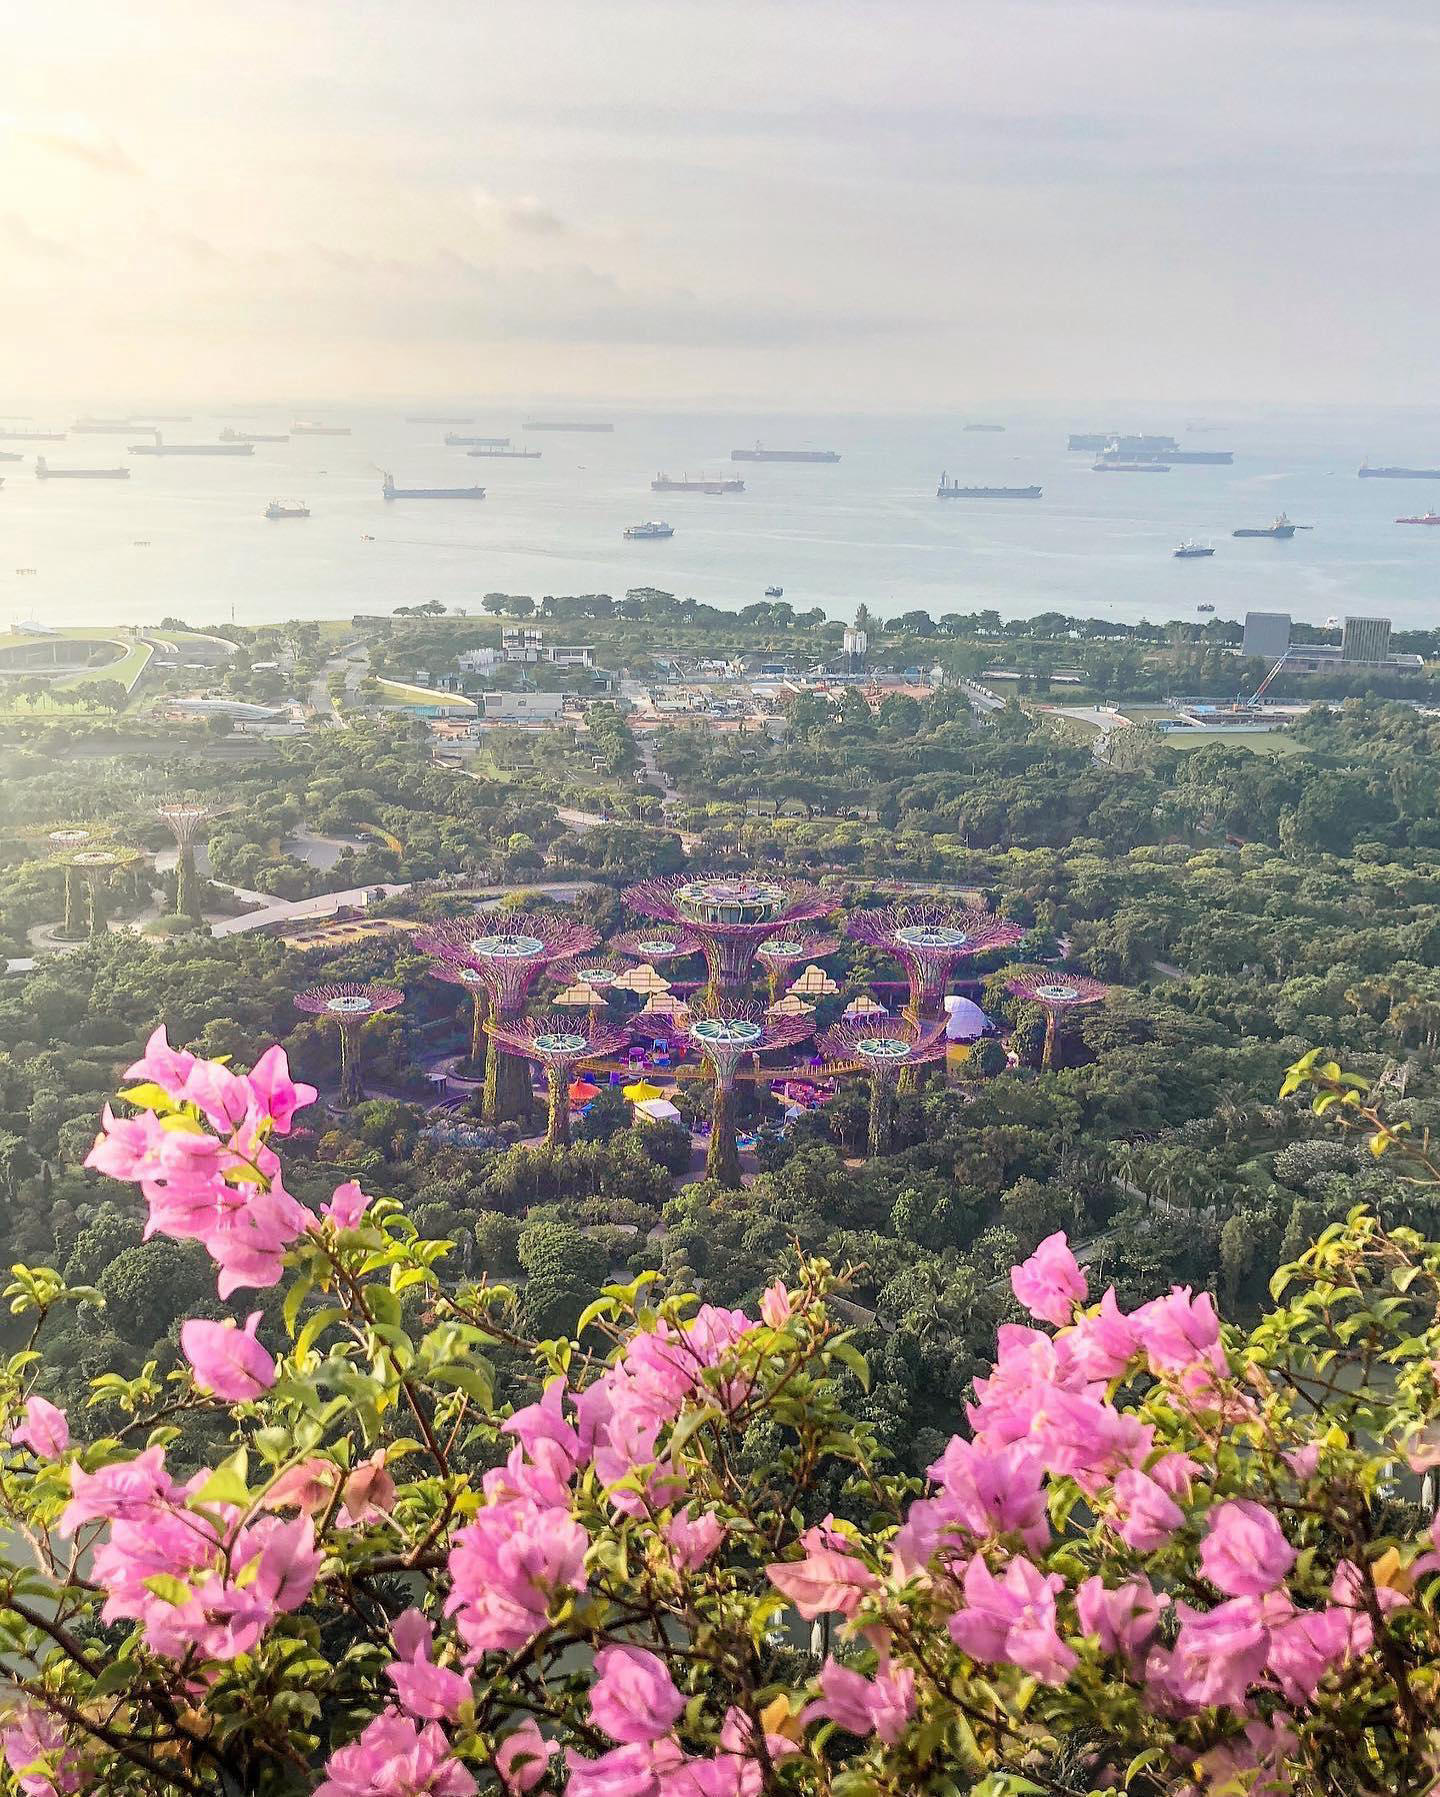 image  1 Singapore 🇸🇬 Travel | Hotels | Food | Tips - Bits and pieces of the magical Singapore through the